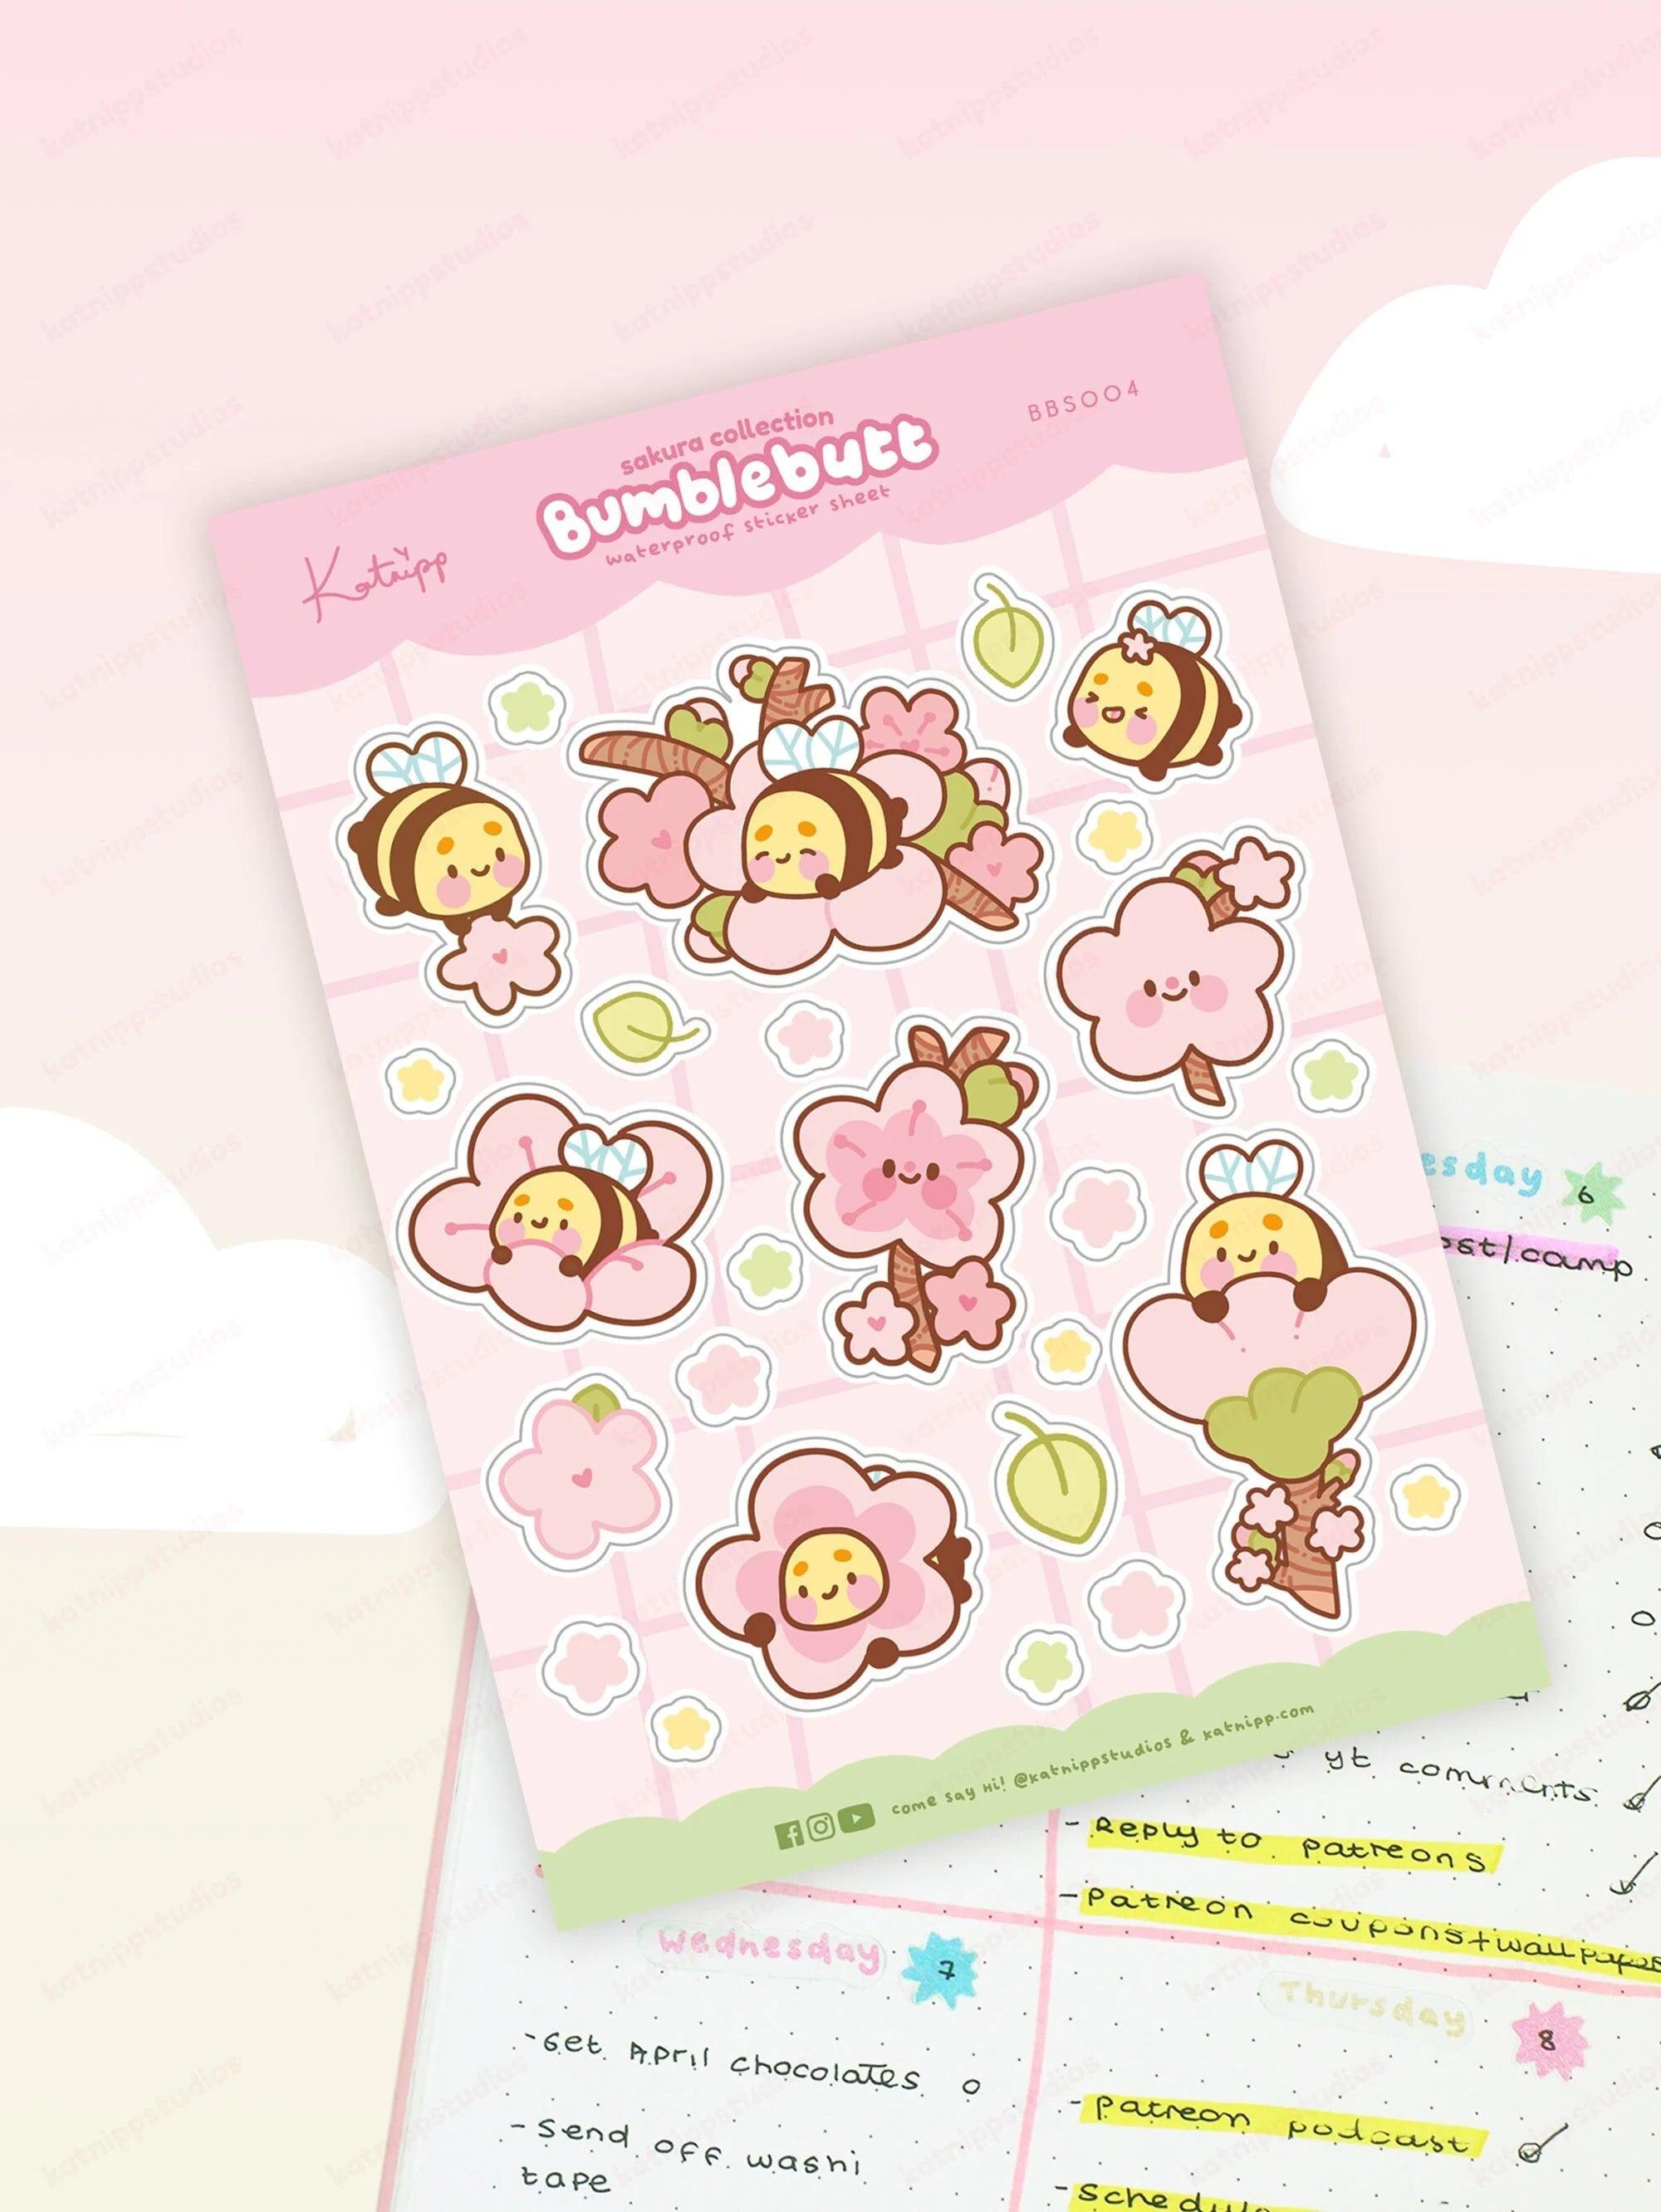 Bumblebutt Sakura A5 sticker sheet featuring cute bumblebee and cherry blossom designs. Waterproof vinyl stickers for planners, journals, and more, main